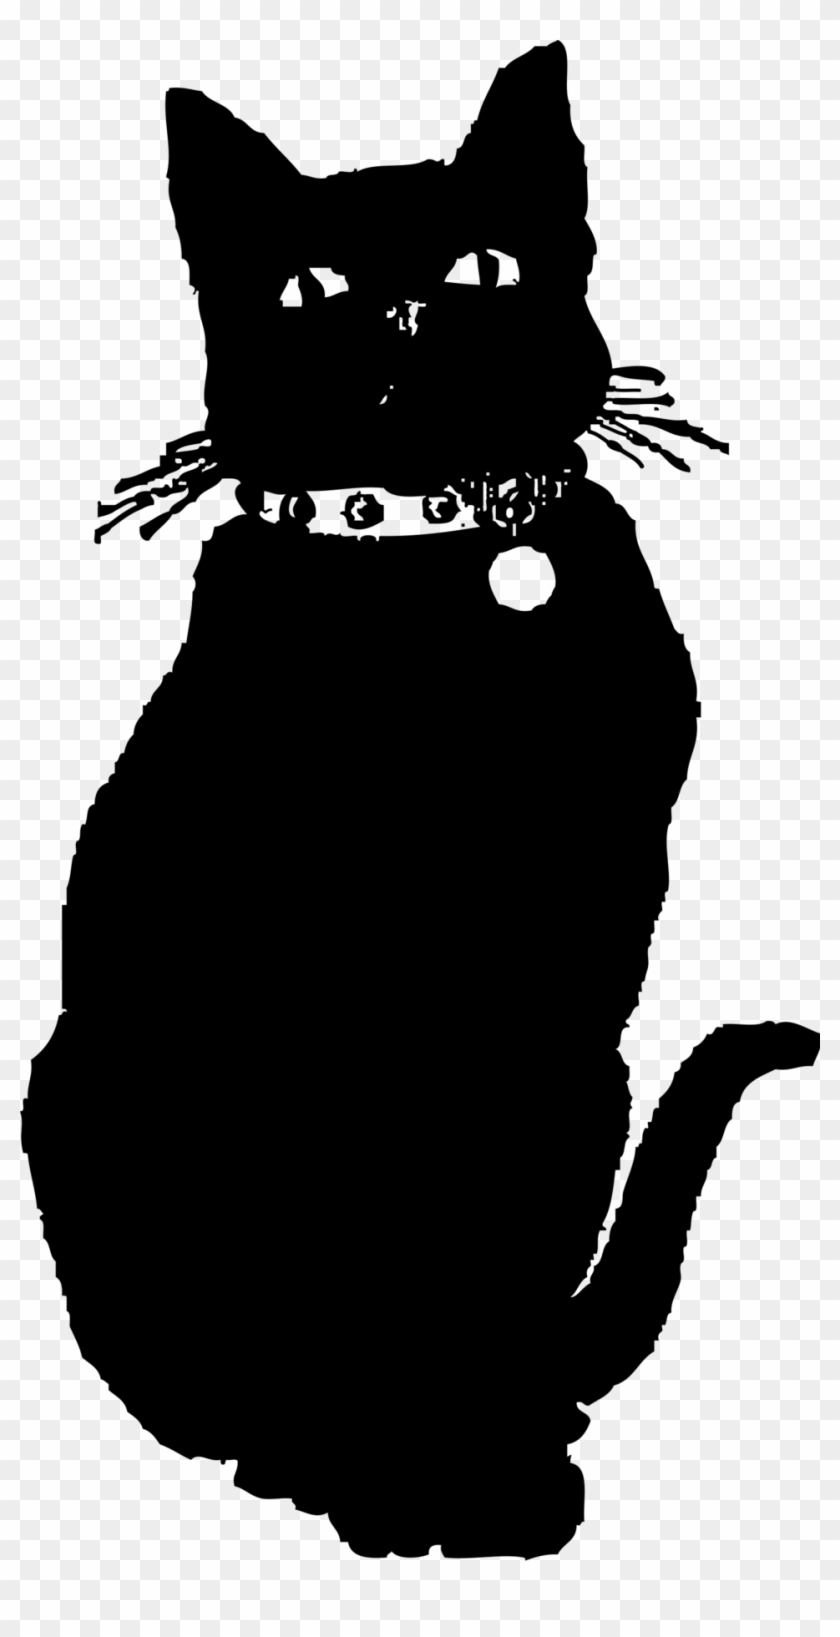 Free Stock Photo - Black Cat Clipart Png Transparent Png #457710